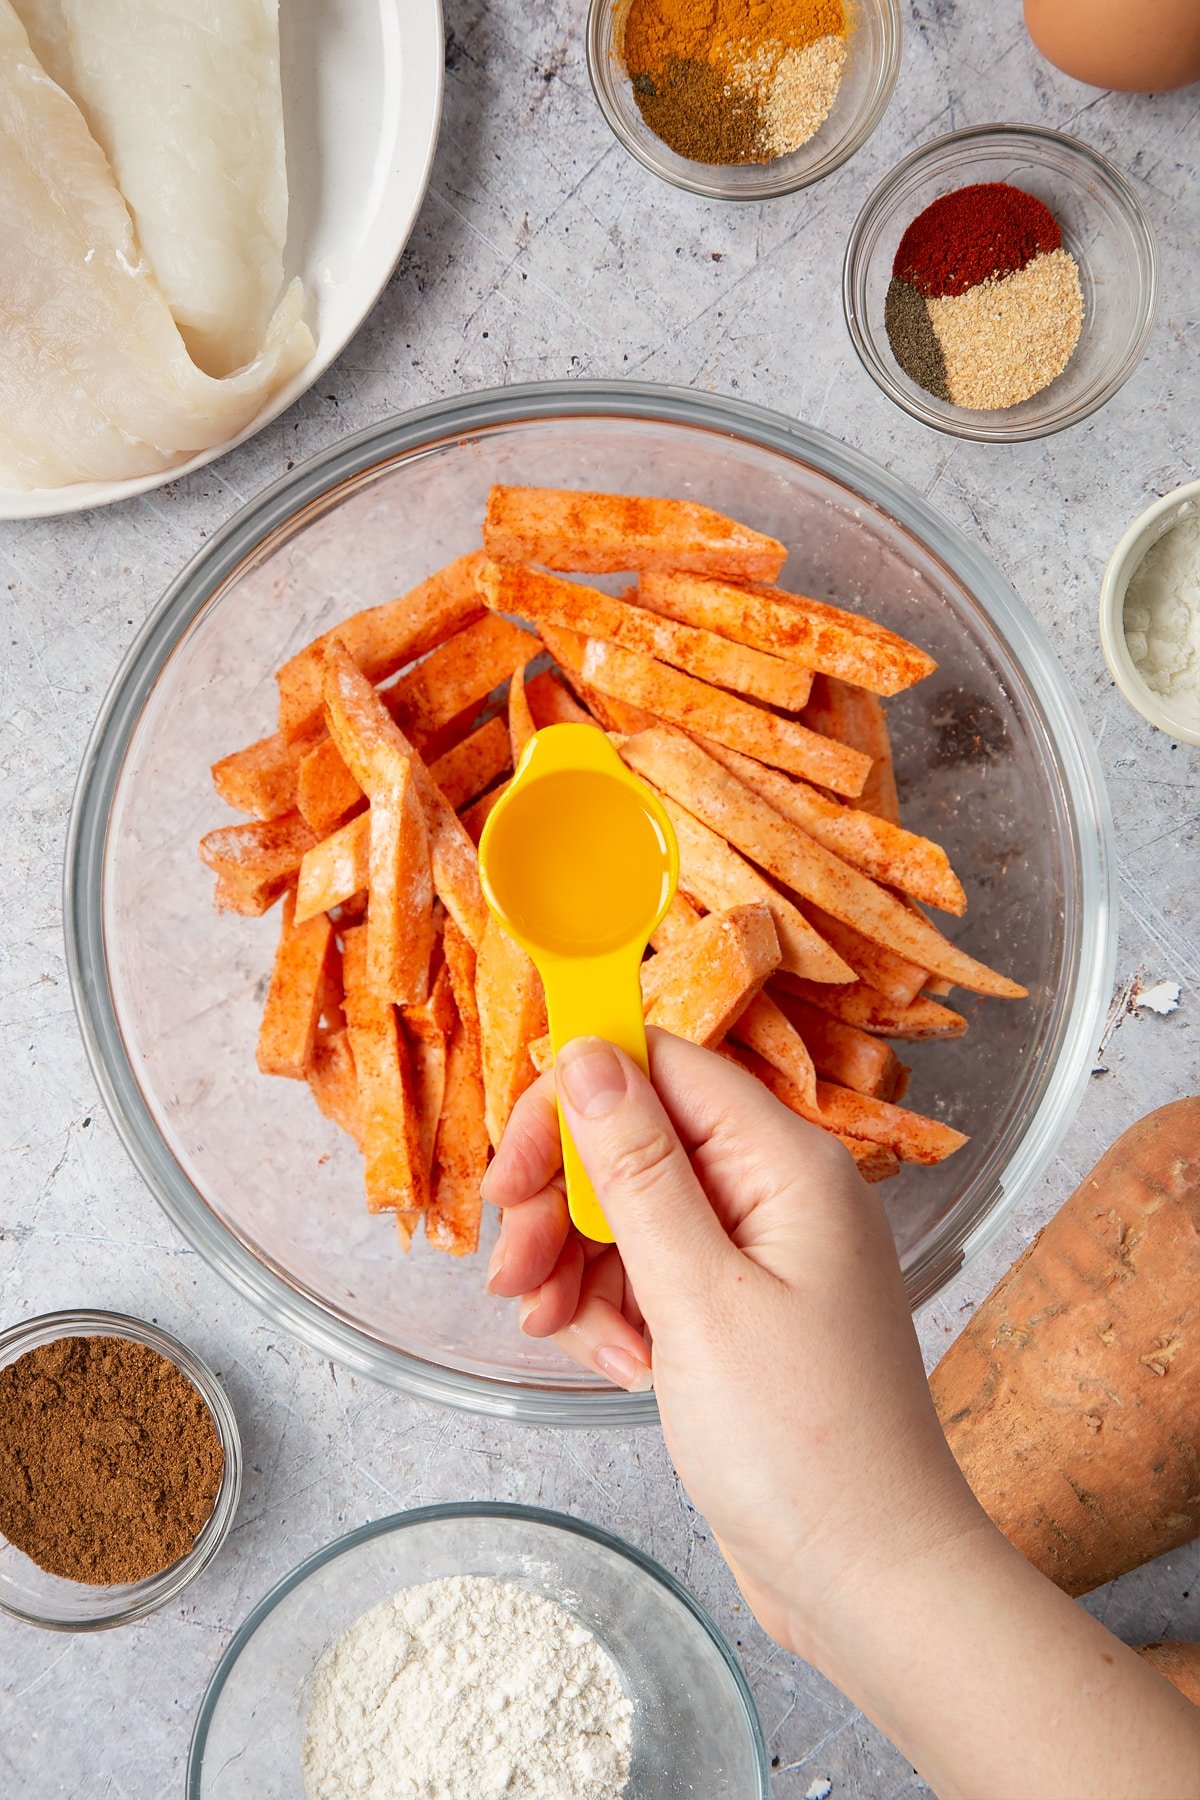 Sweet potato cut into fries and tossed in cornflour in a glass bowl. A hand holds a tablespoon of oil above the bowl. Surrounding the bowl is ingredients for sweet potato chips.